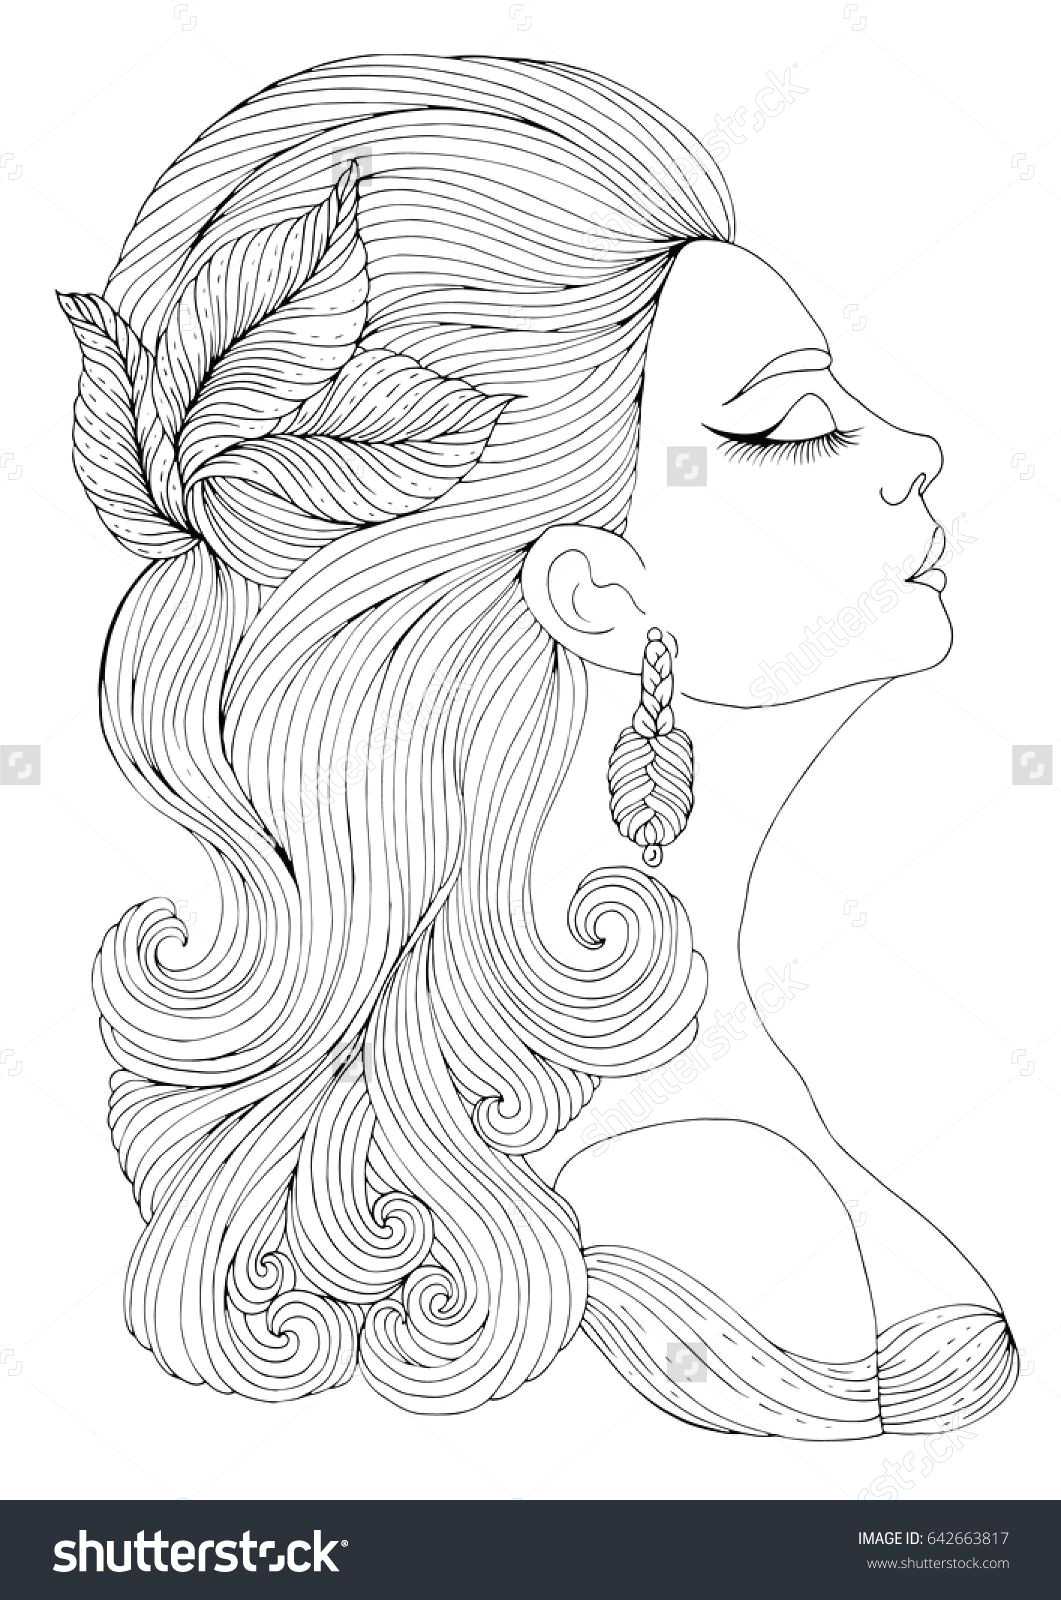 vector hand drawn portrait in profile of elegant lady in retro style girl with wavy hair with a hairpin in the form of leaves art deco style